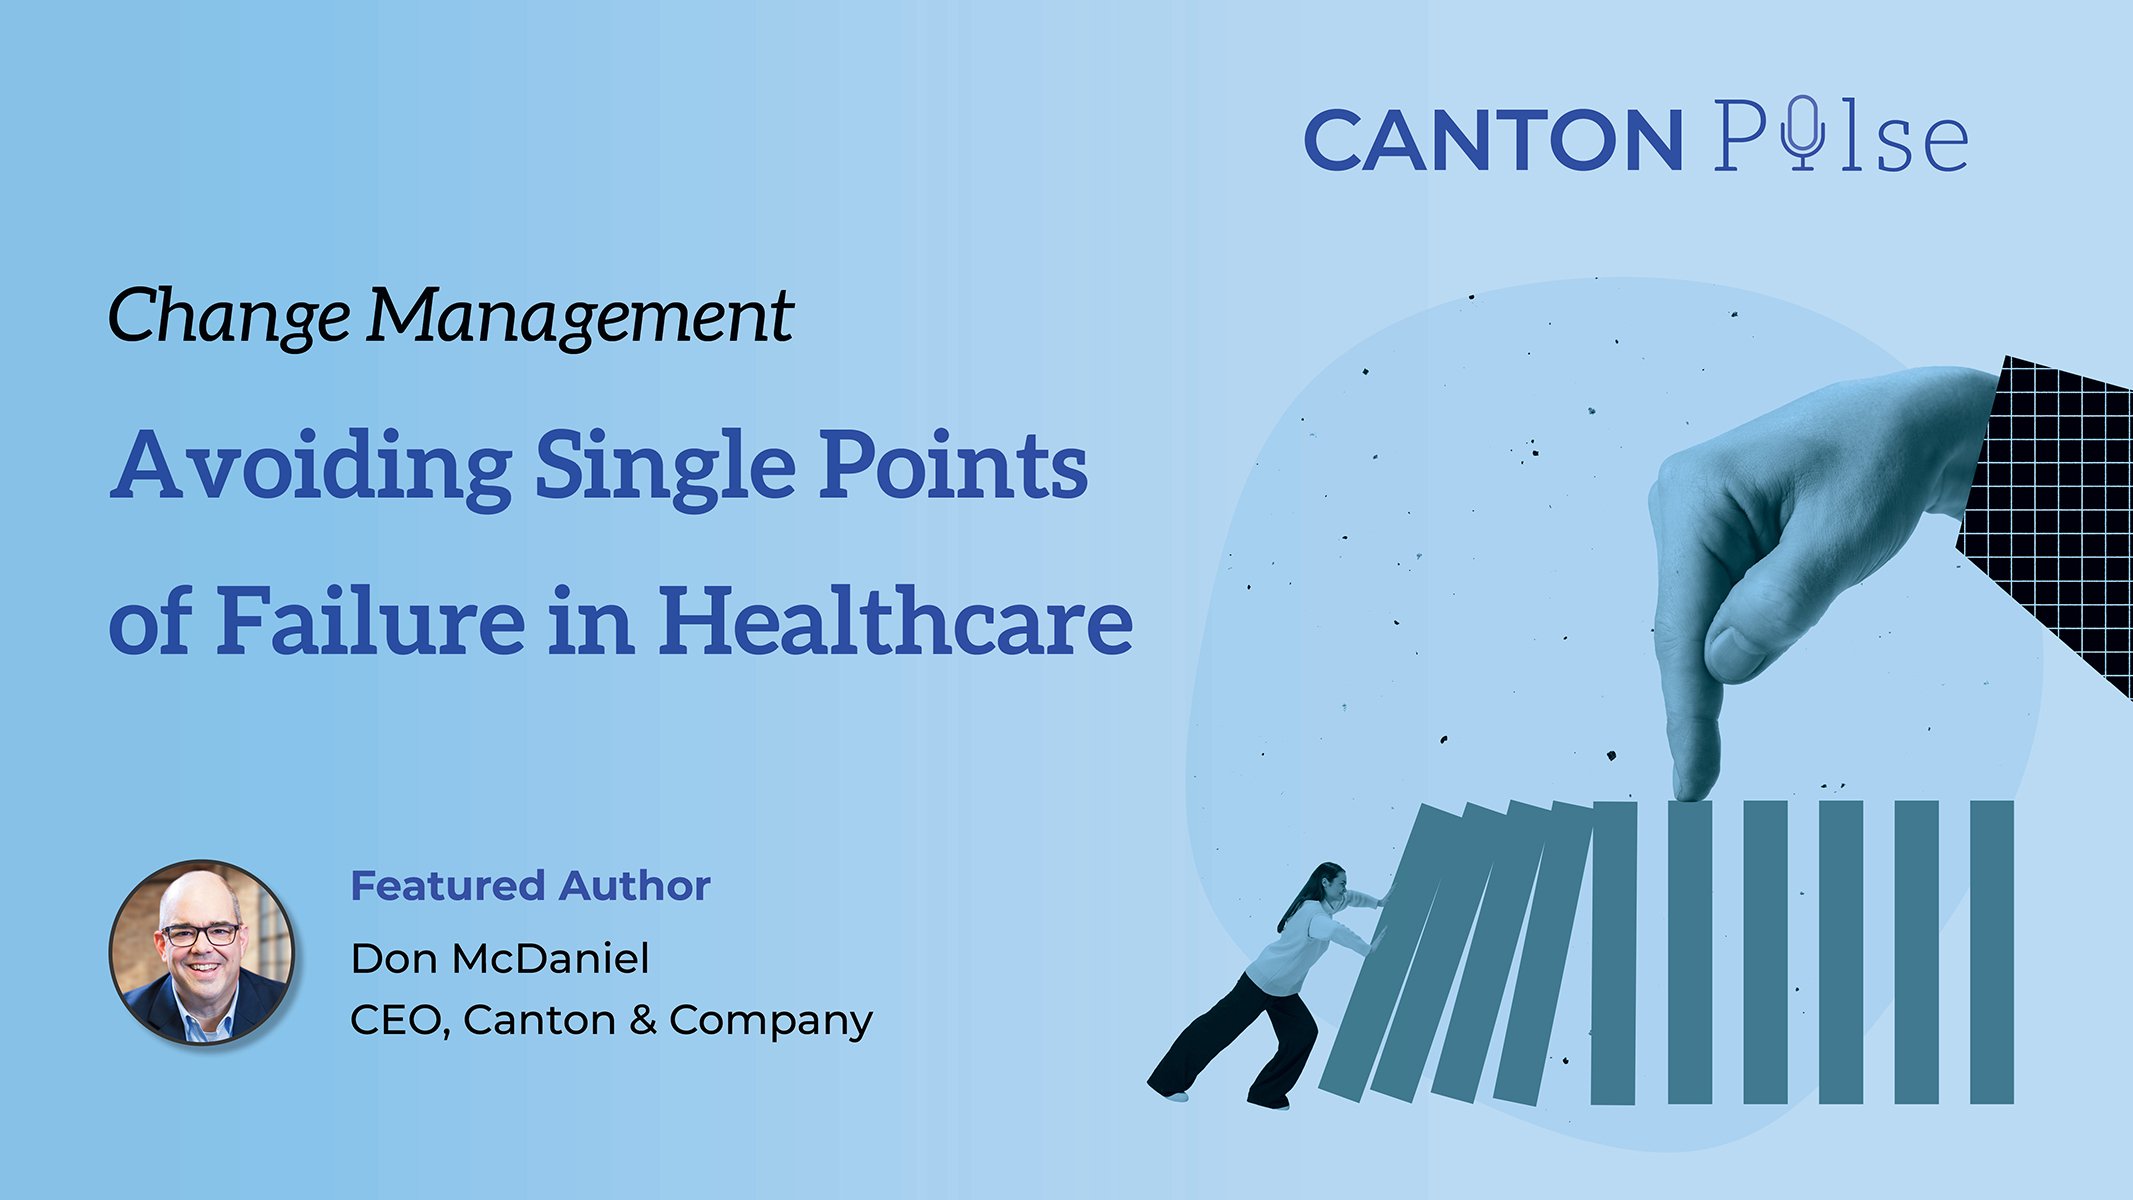 Change Management: Avoiding Single Points of Failure in Healthcare